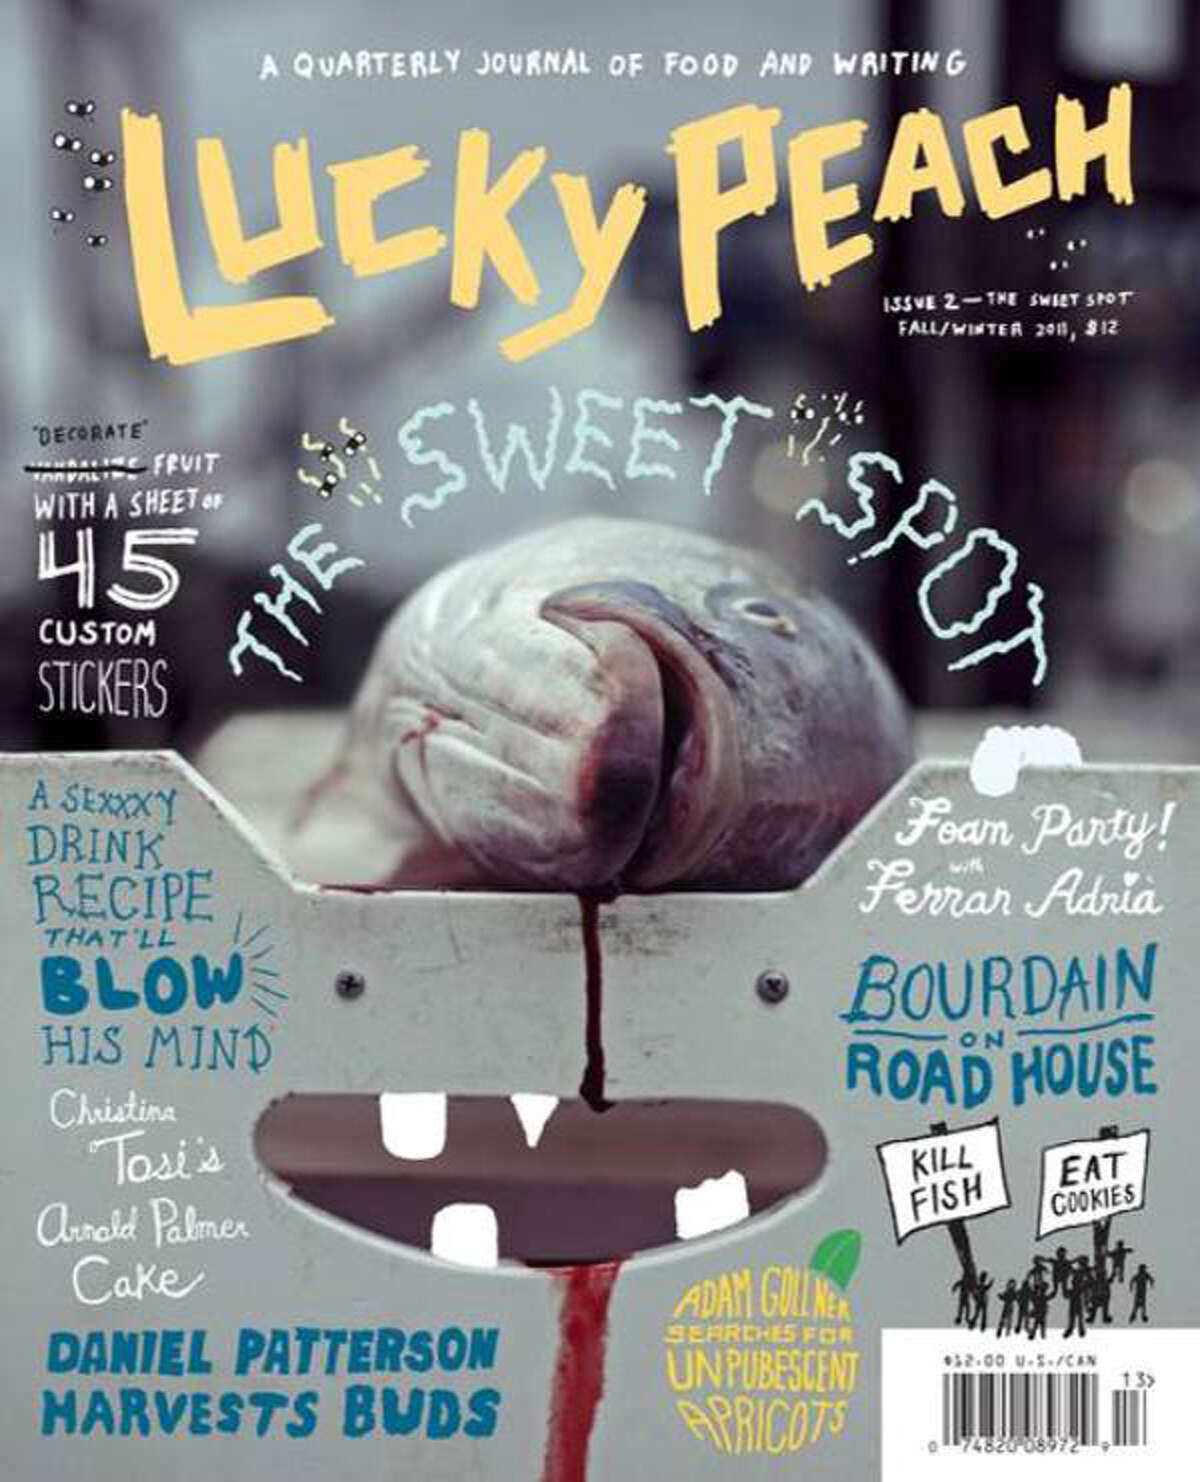 The cover of the second issue of Lucky Peach.